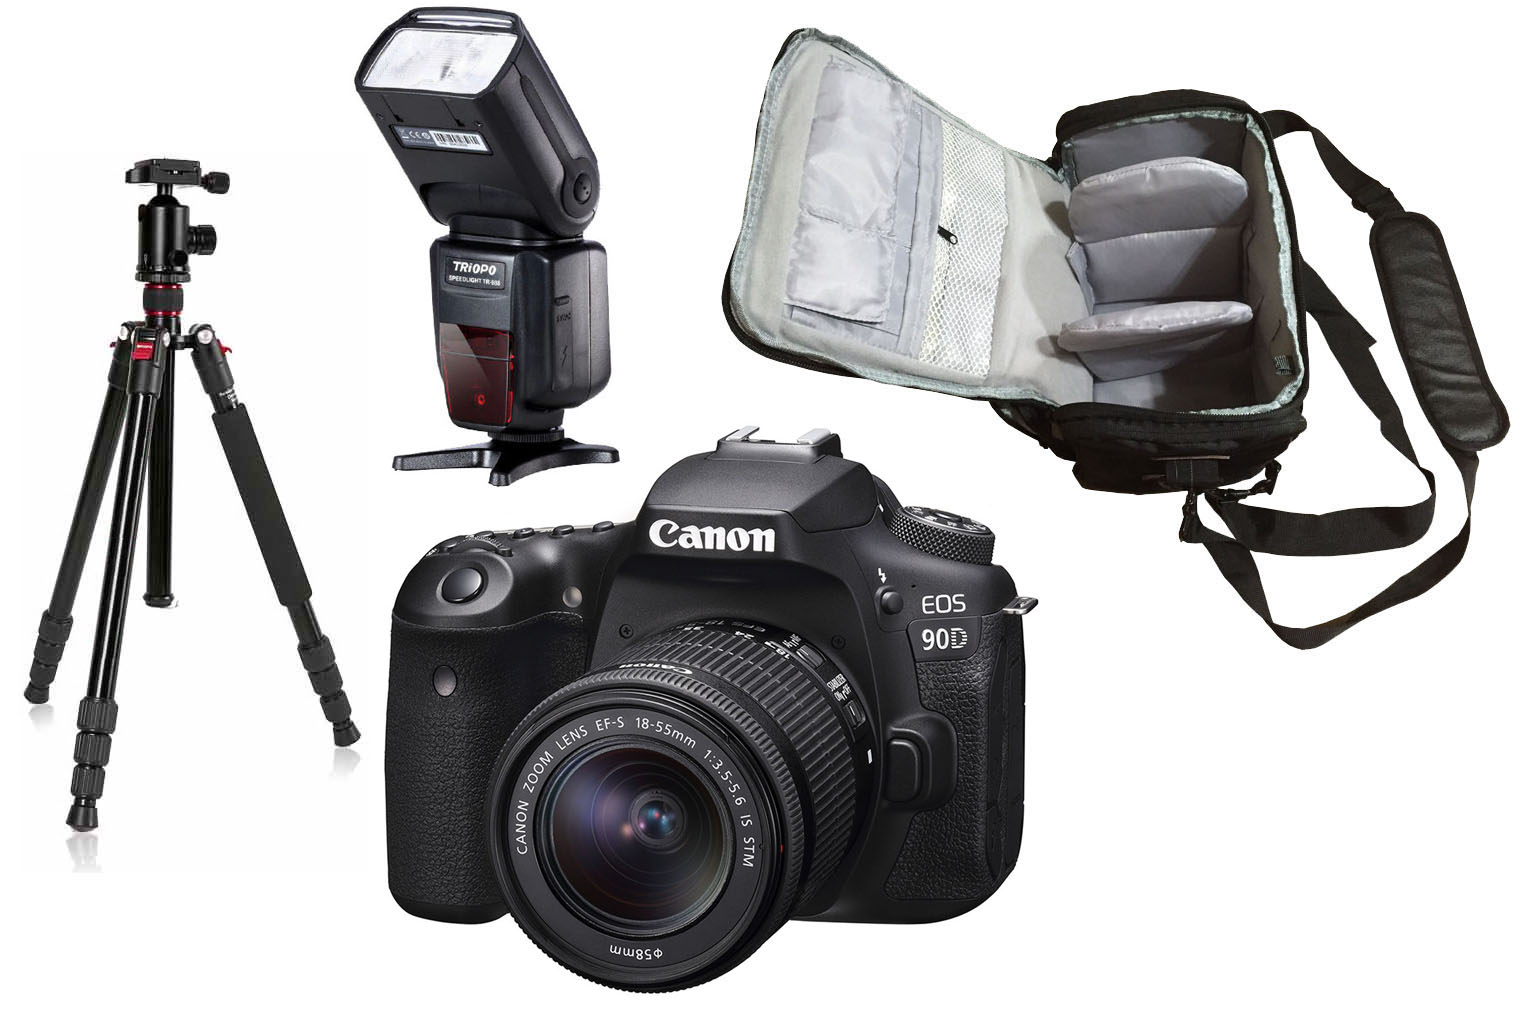 Canon 90D + 18-55 + Camera Bag + Flash + Tripod - 2 Year Warranty - Next Day Delivery